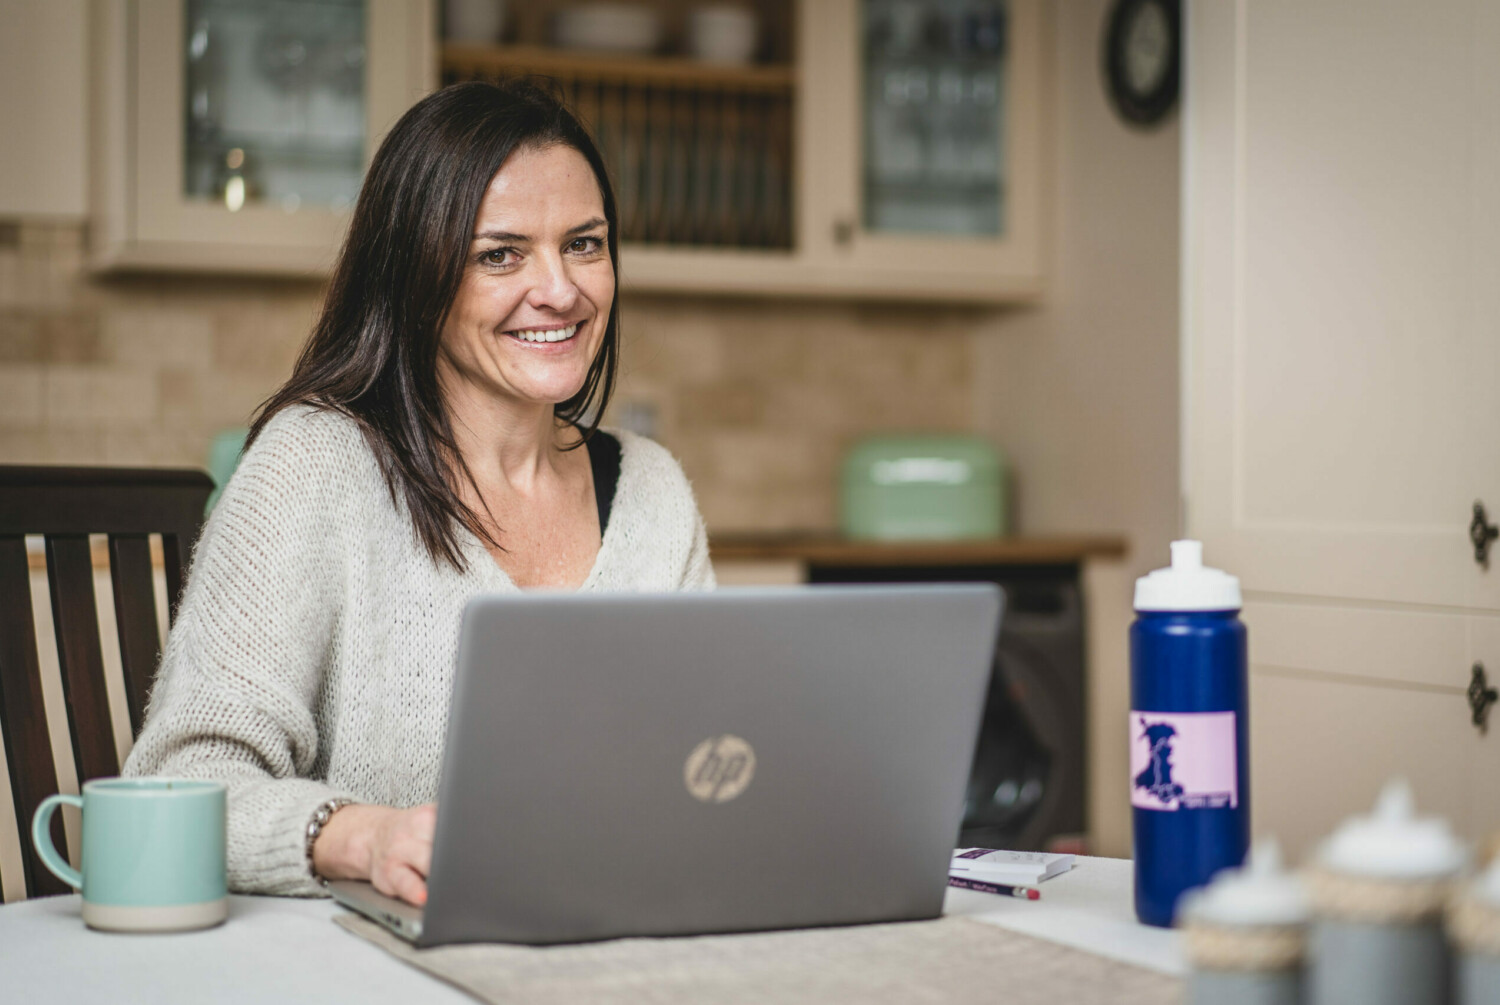 Woman sat in front of laptop